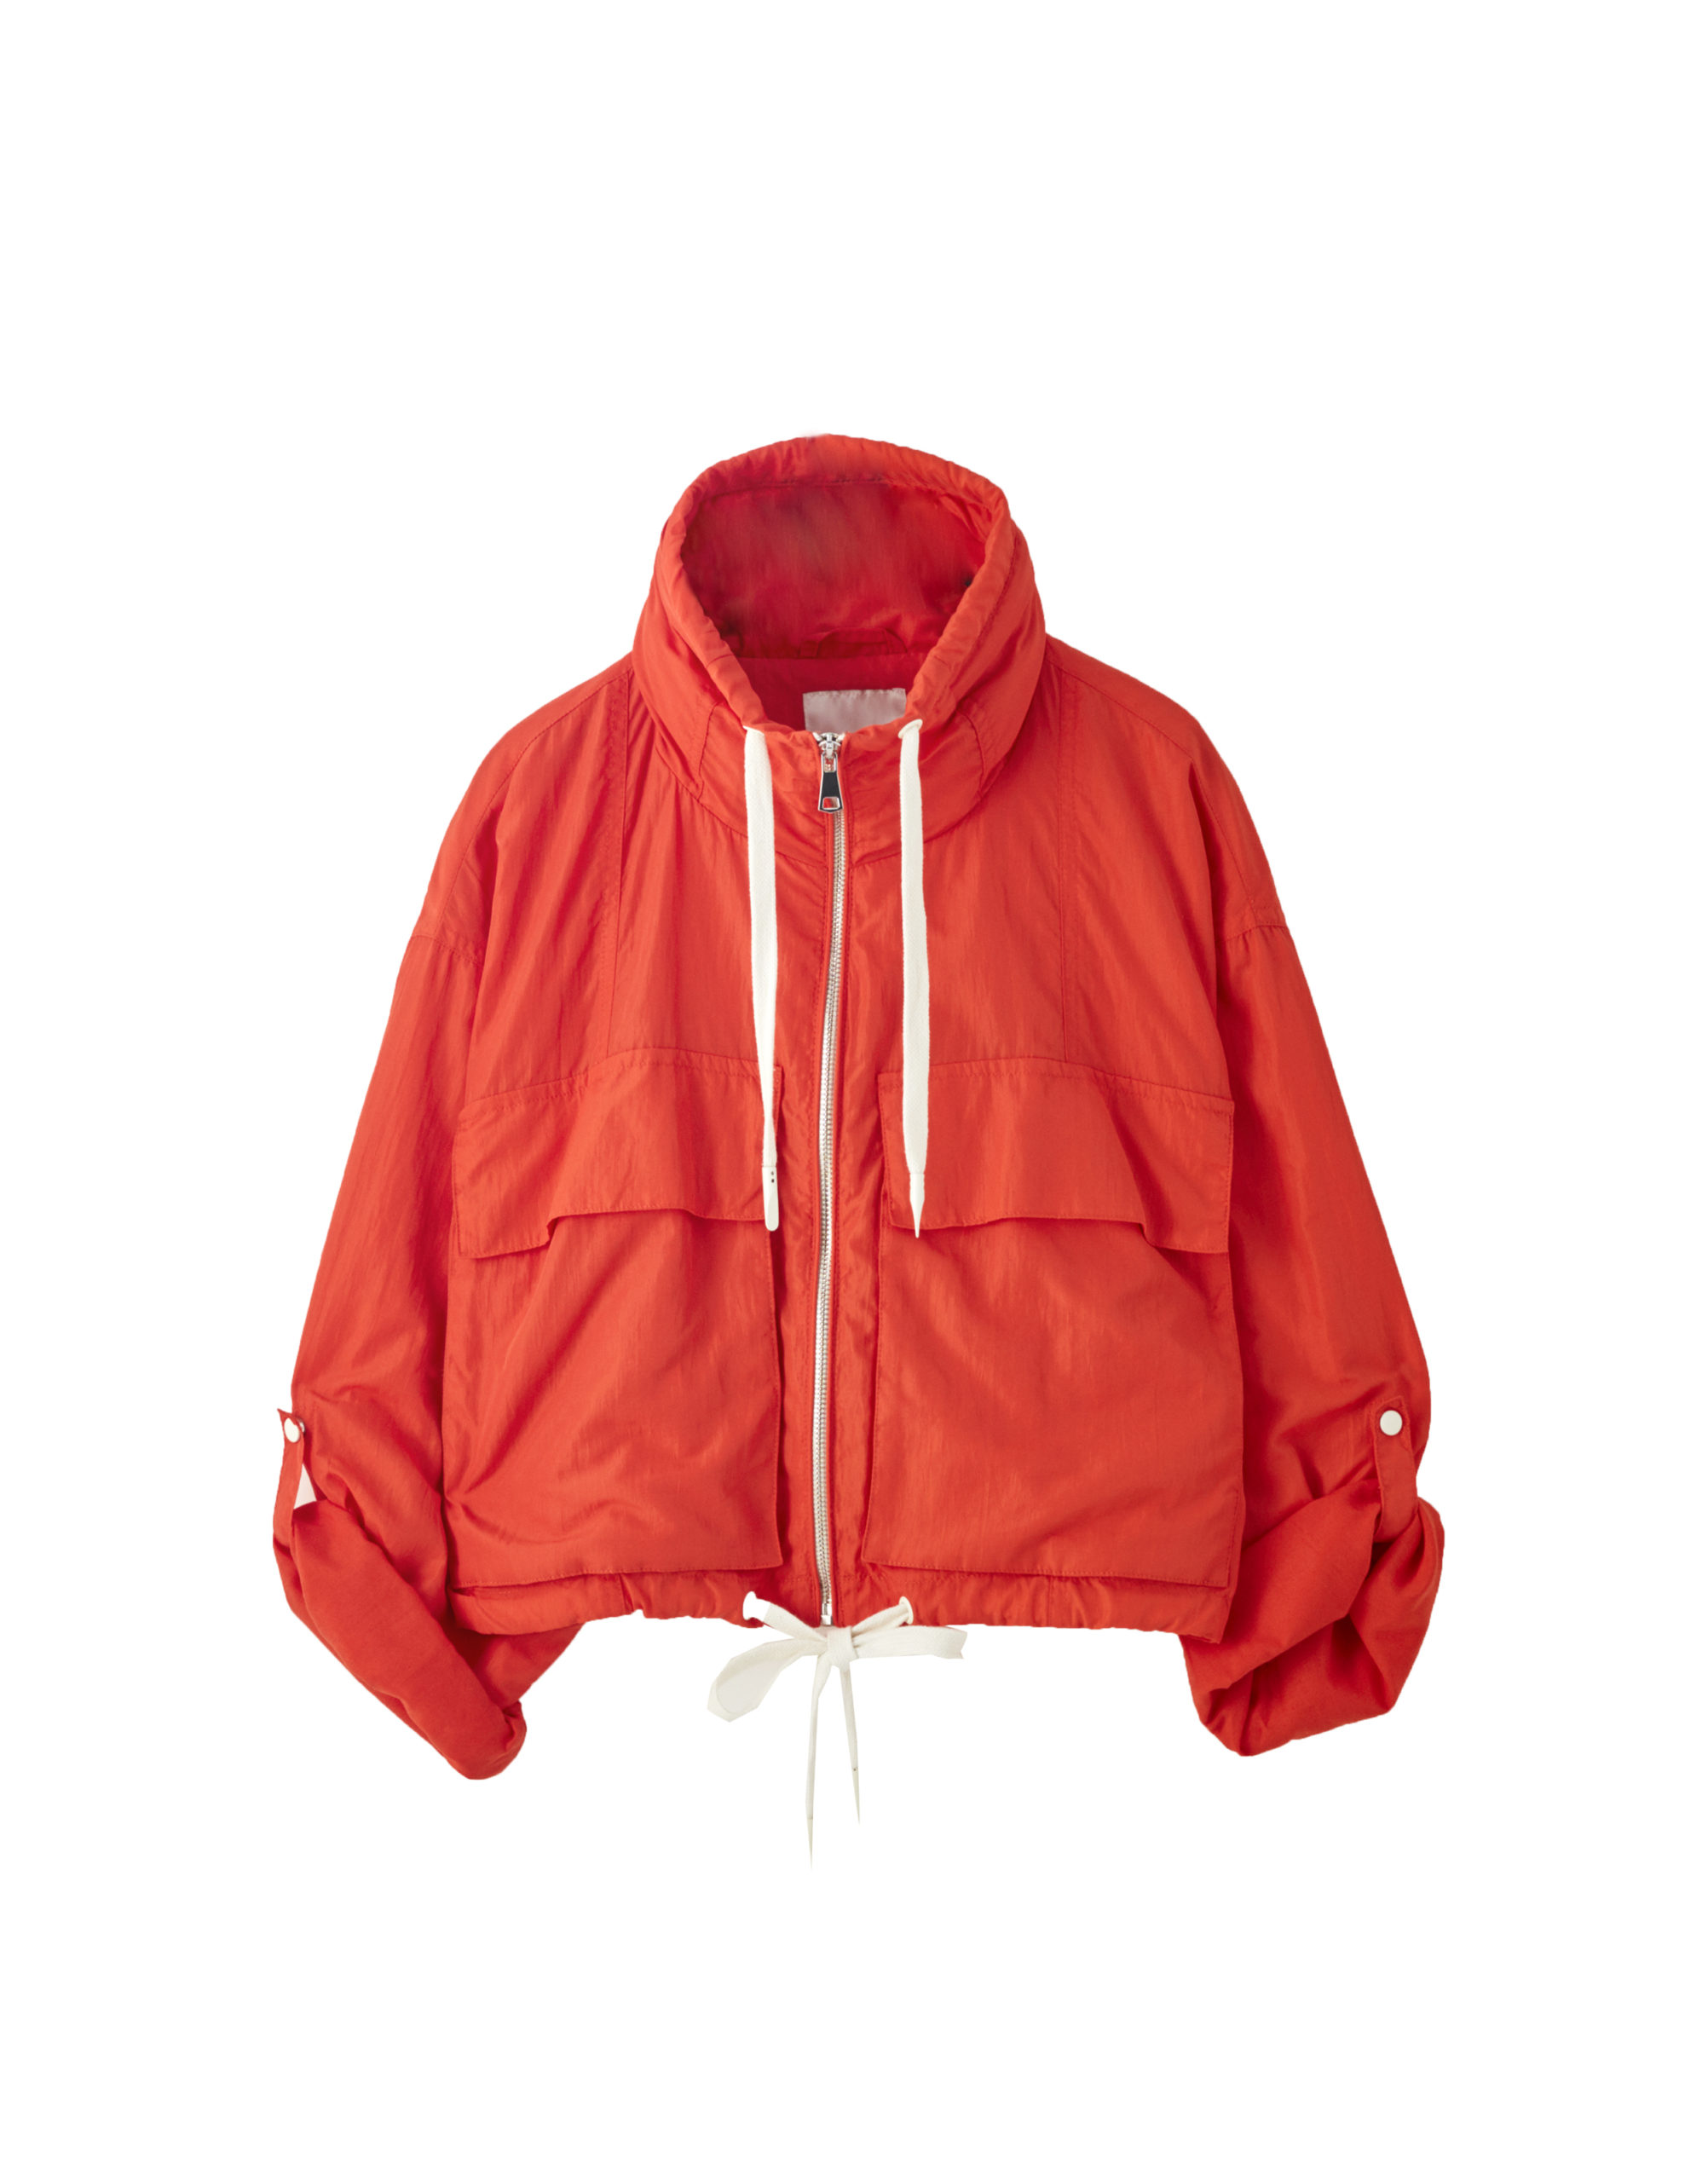 Lightweight Jacket With Front Pockets